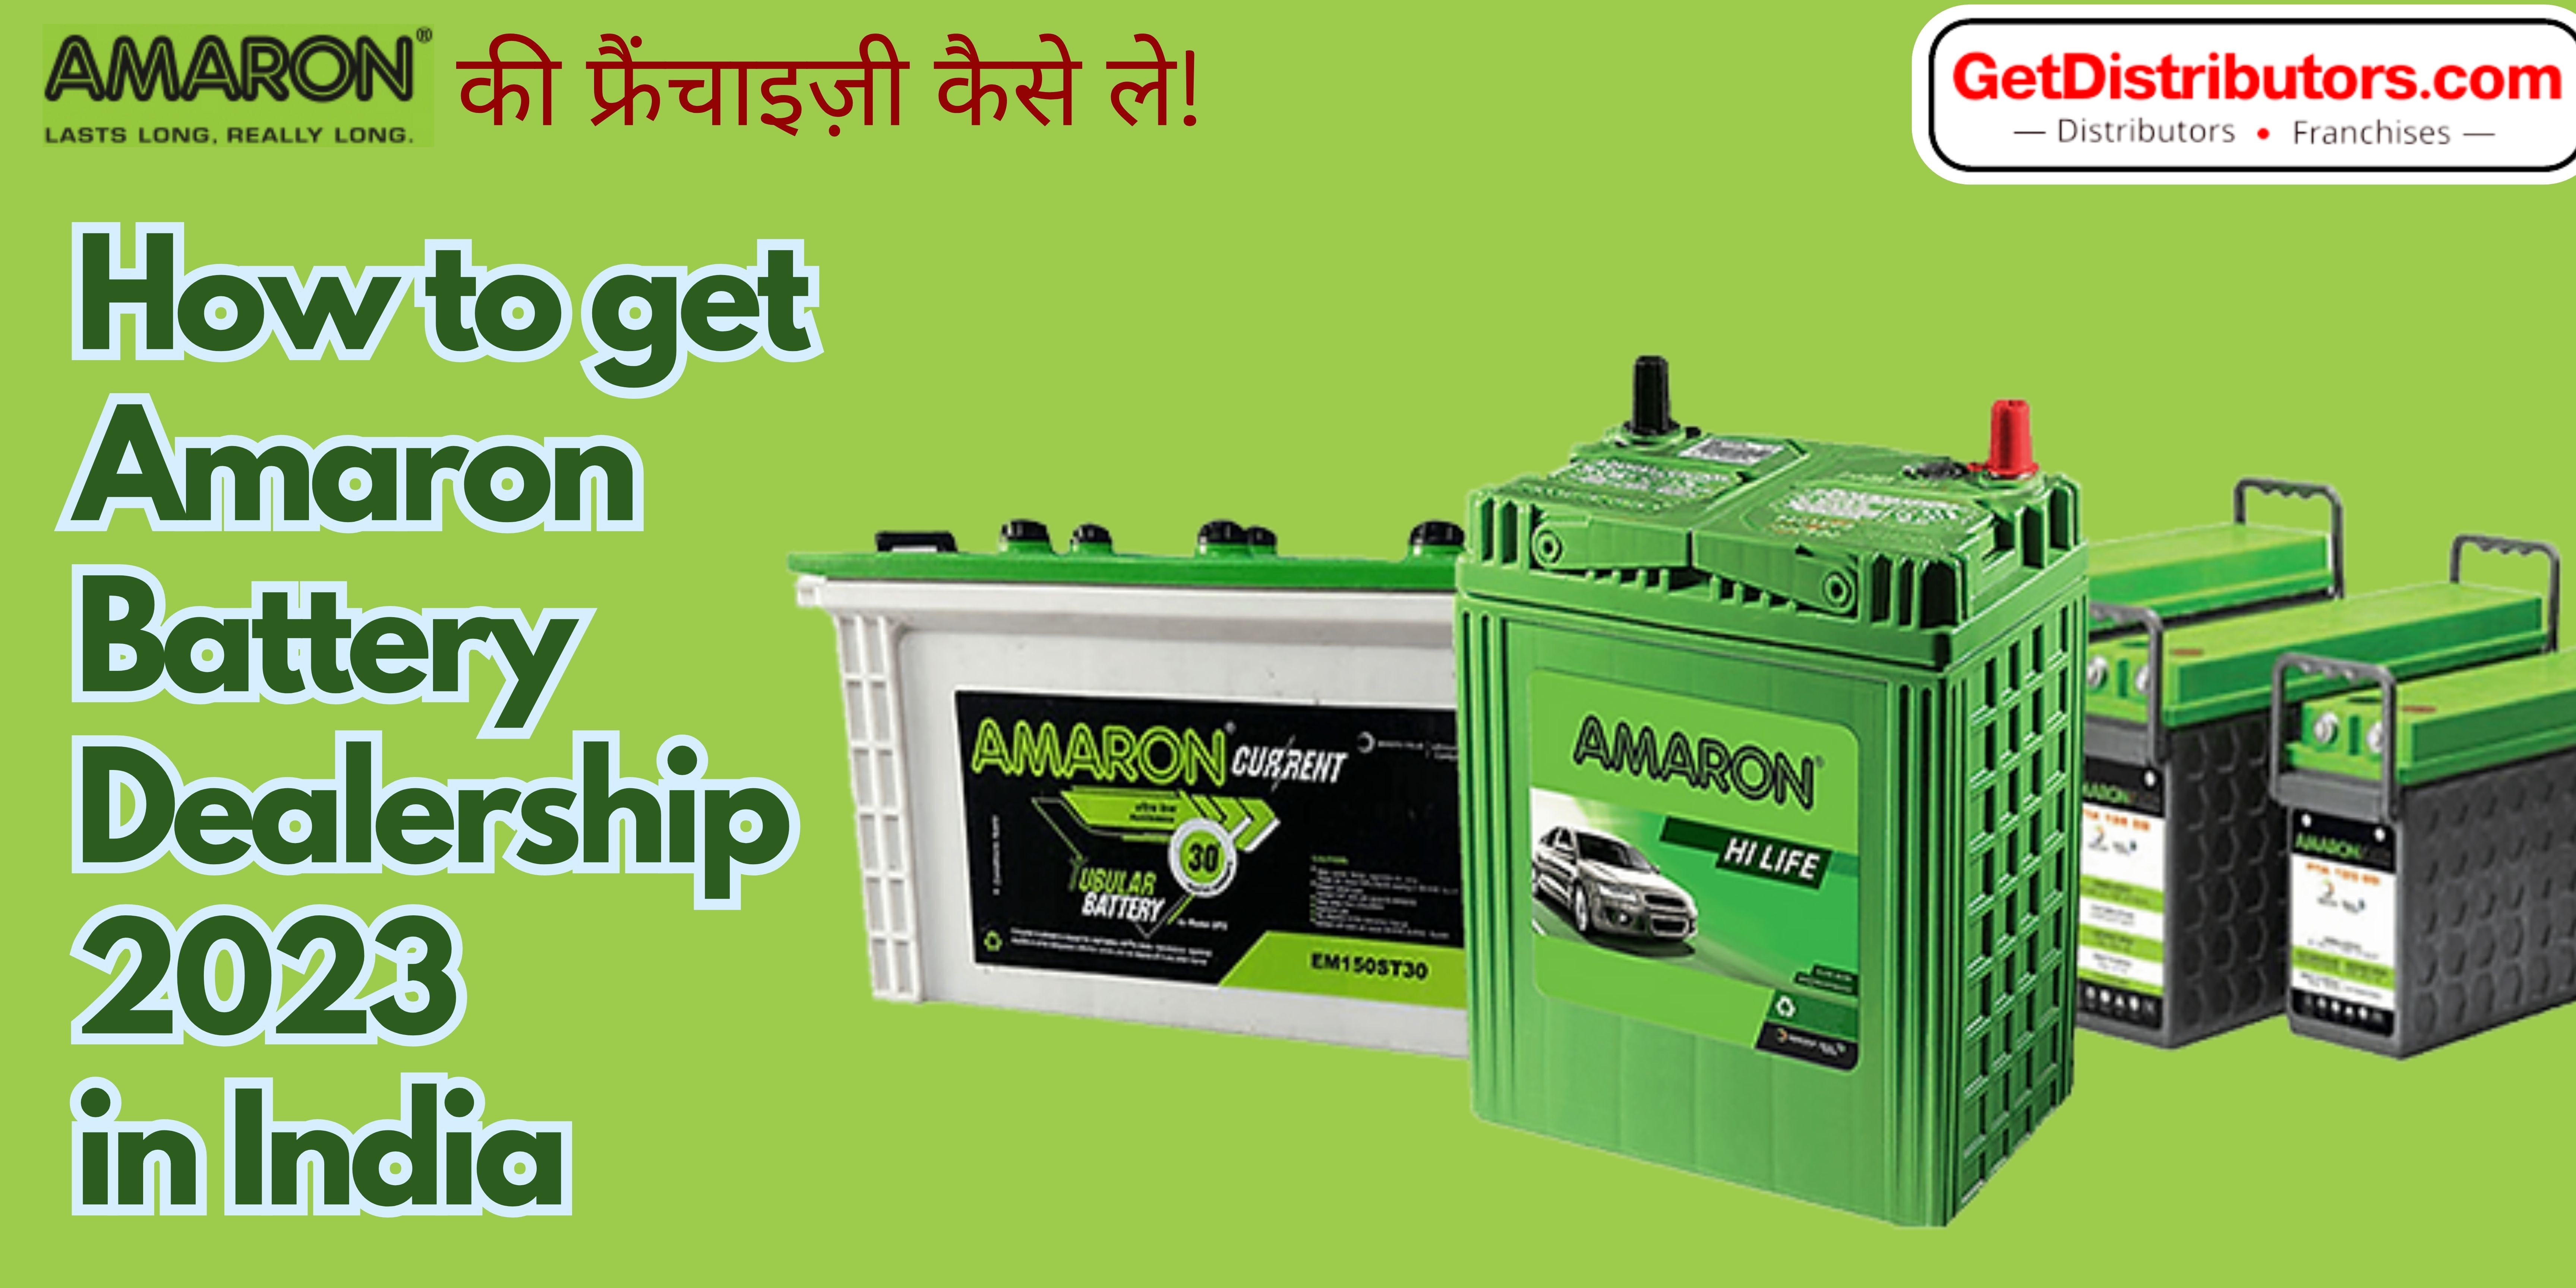 How to get Amaron Battery Dealership in India